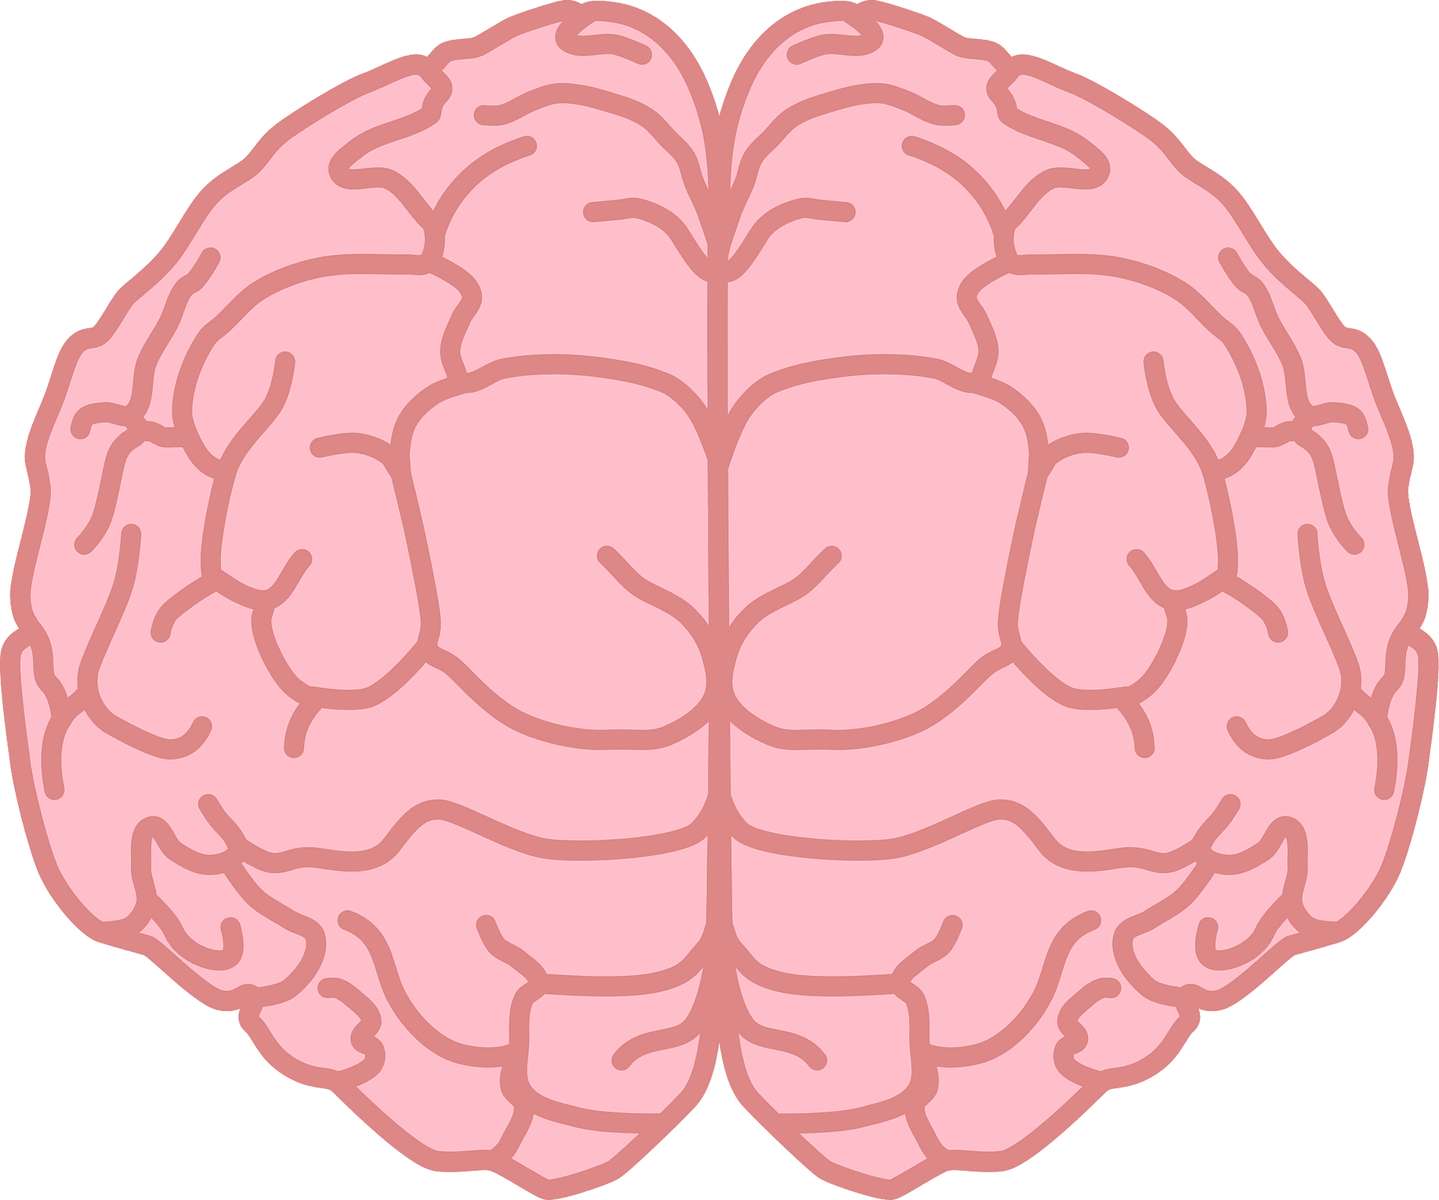 Brain Puzzle puzzle online from photo